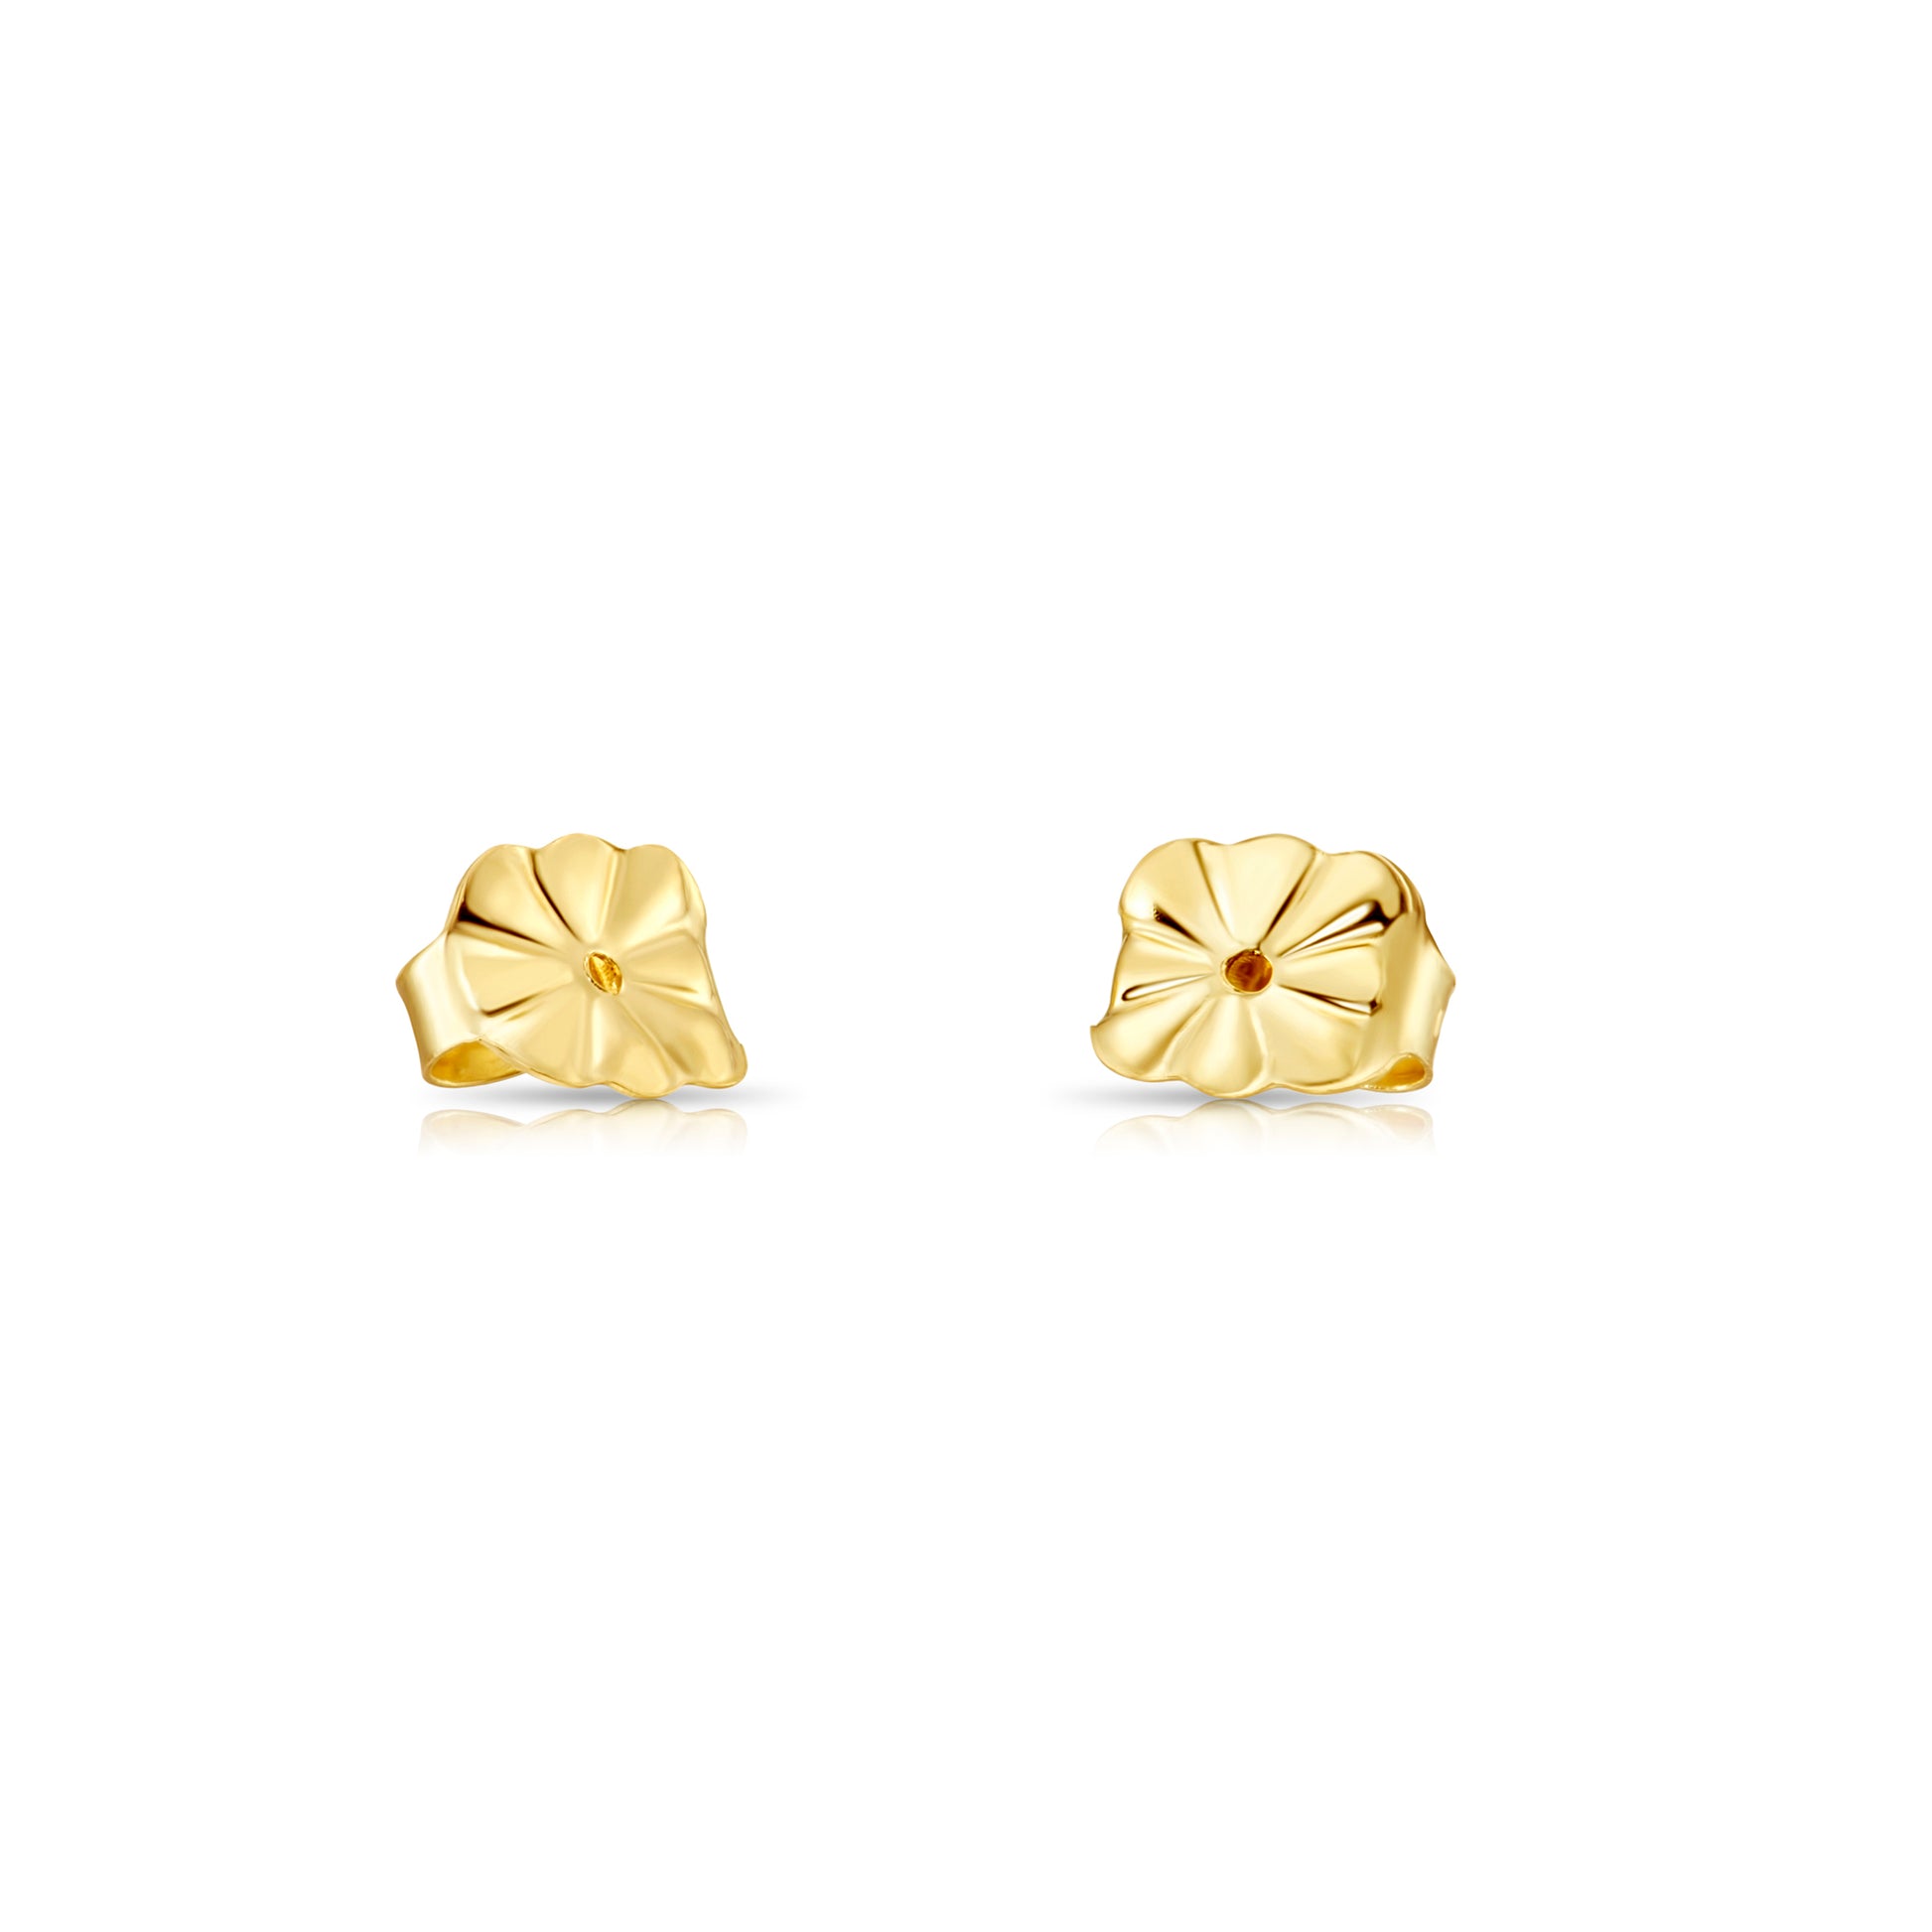 14k Solid Gold Replacement Backings - For TILO JEWELRY BRAND Push